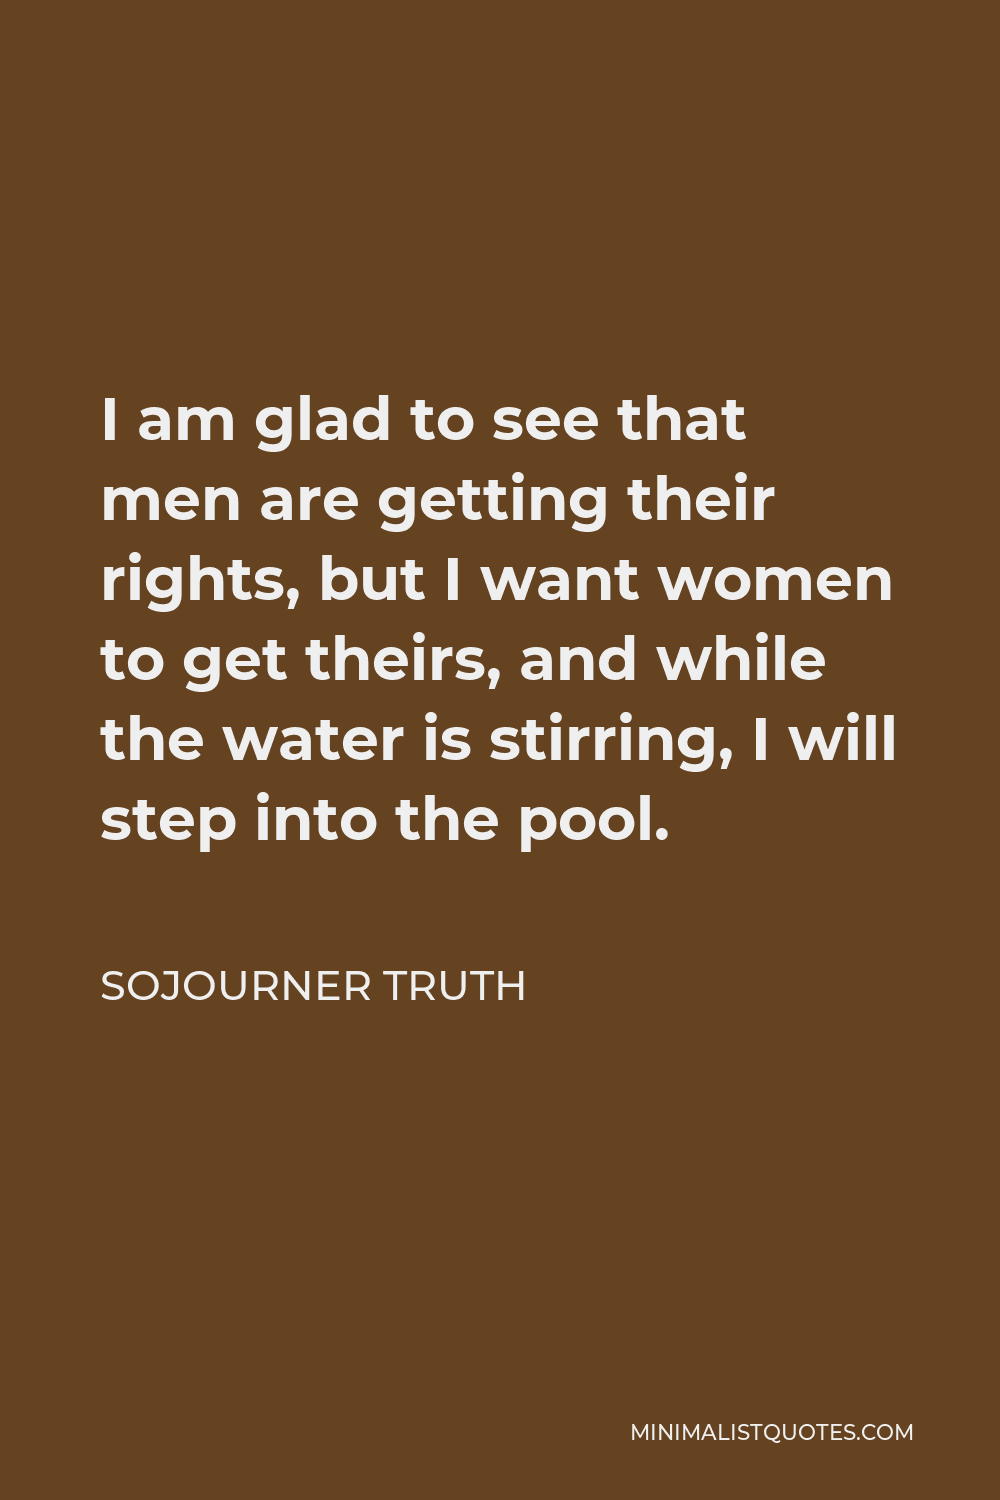 Sojourner Truth Quote - I am glad to see that men are getting their rights, but I want women to get theirs, and while the water is stirring, I will step into the pool.